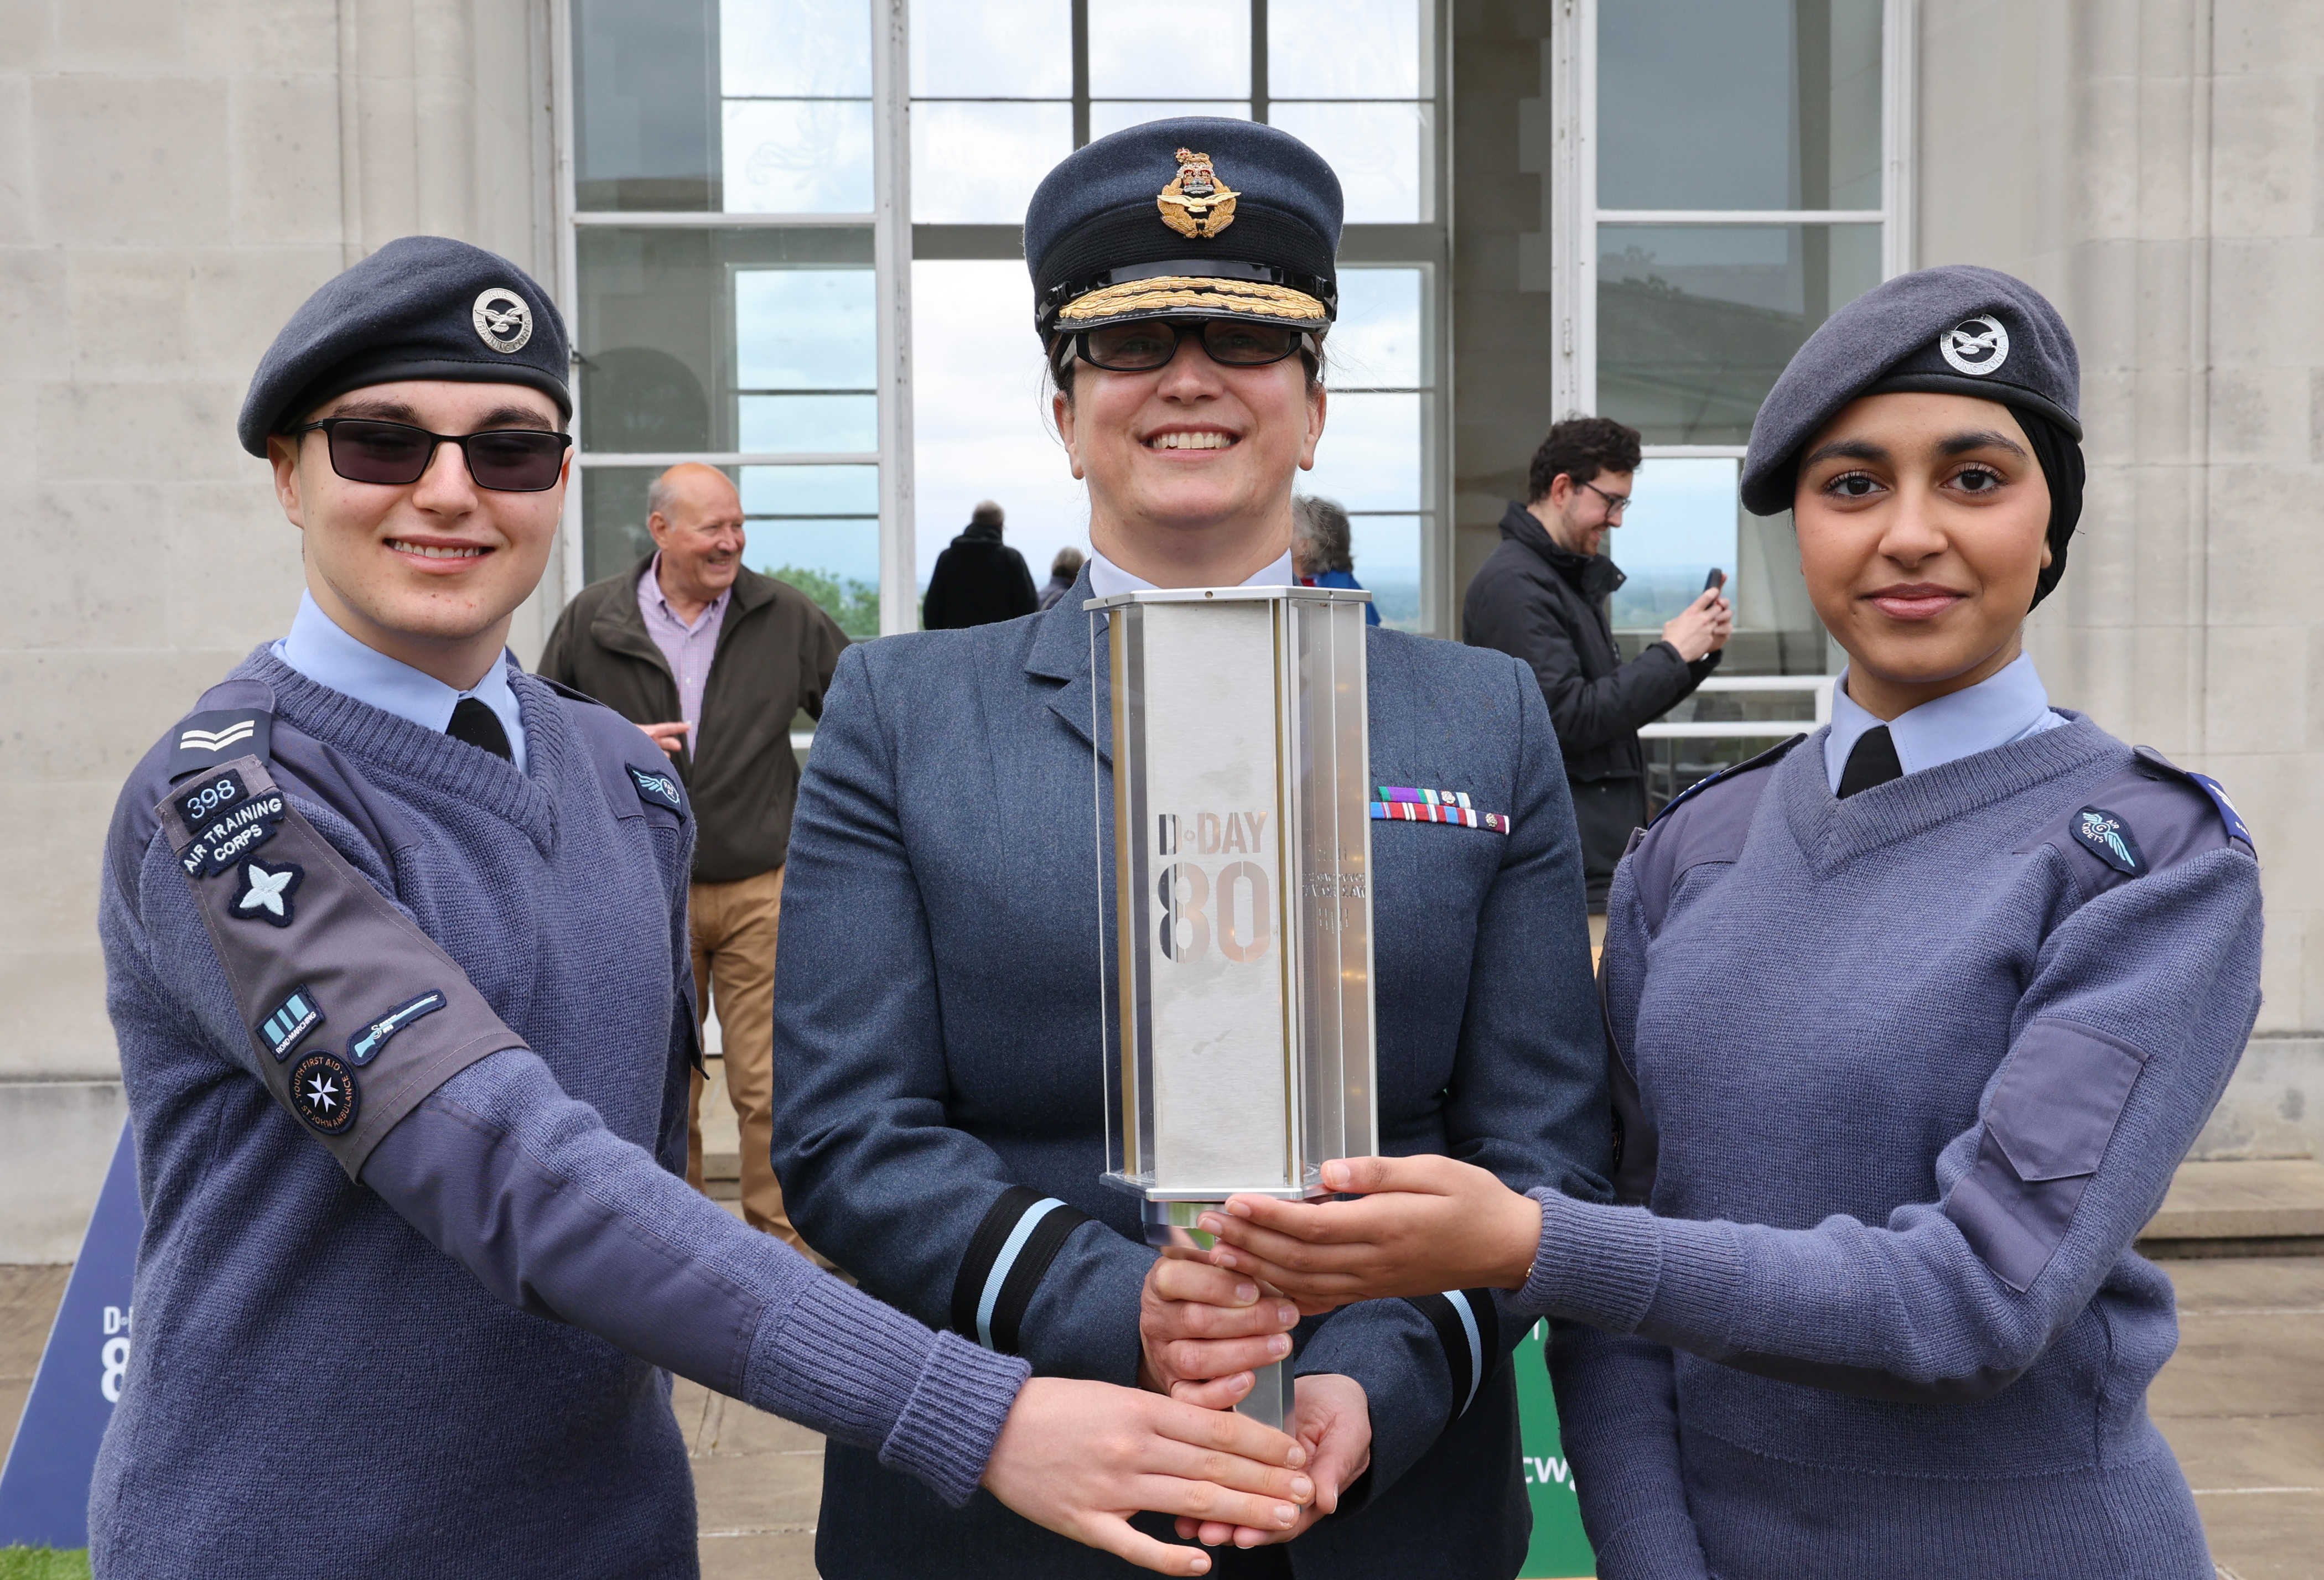 RAF Air Cadets with the Torch